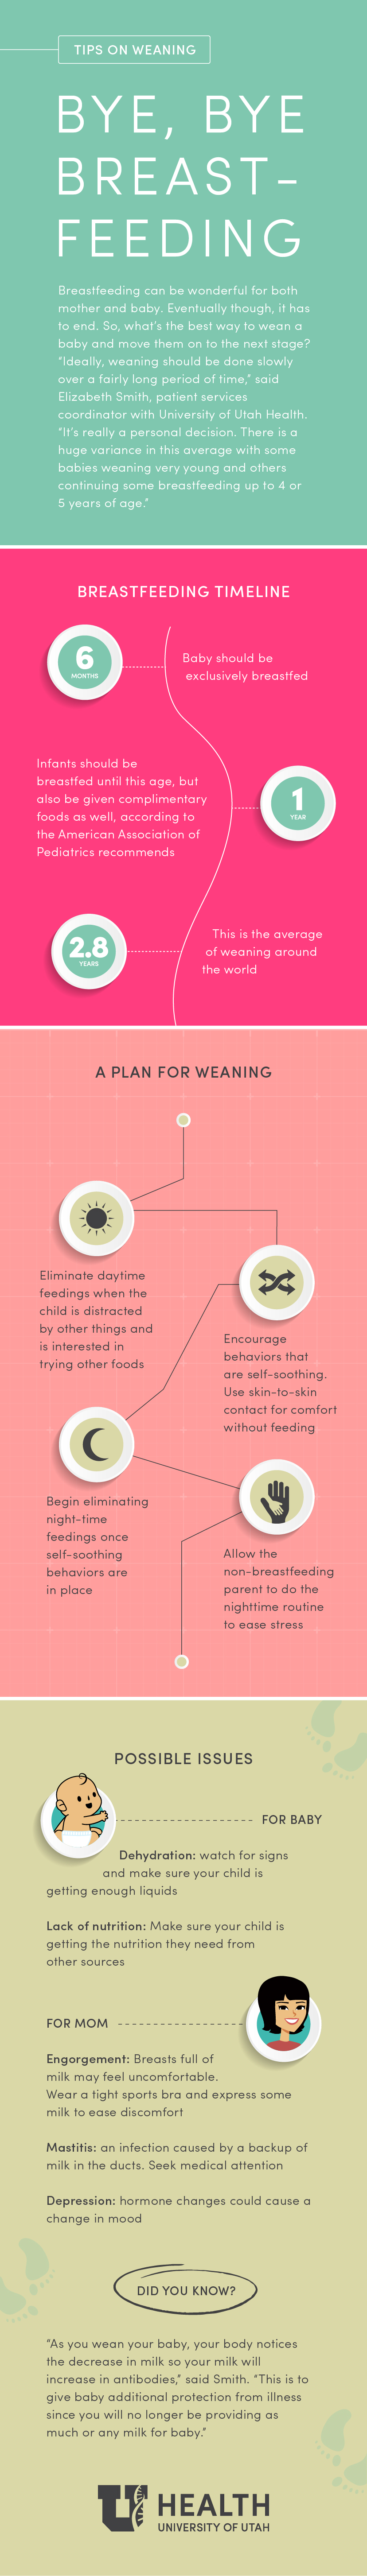 weaning infographic